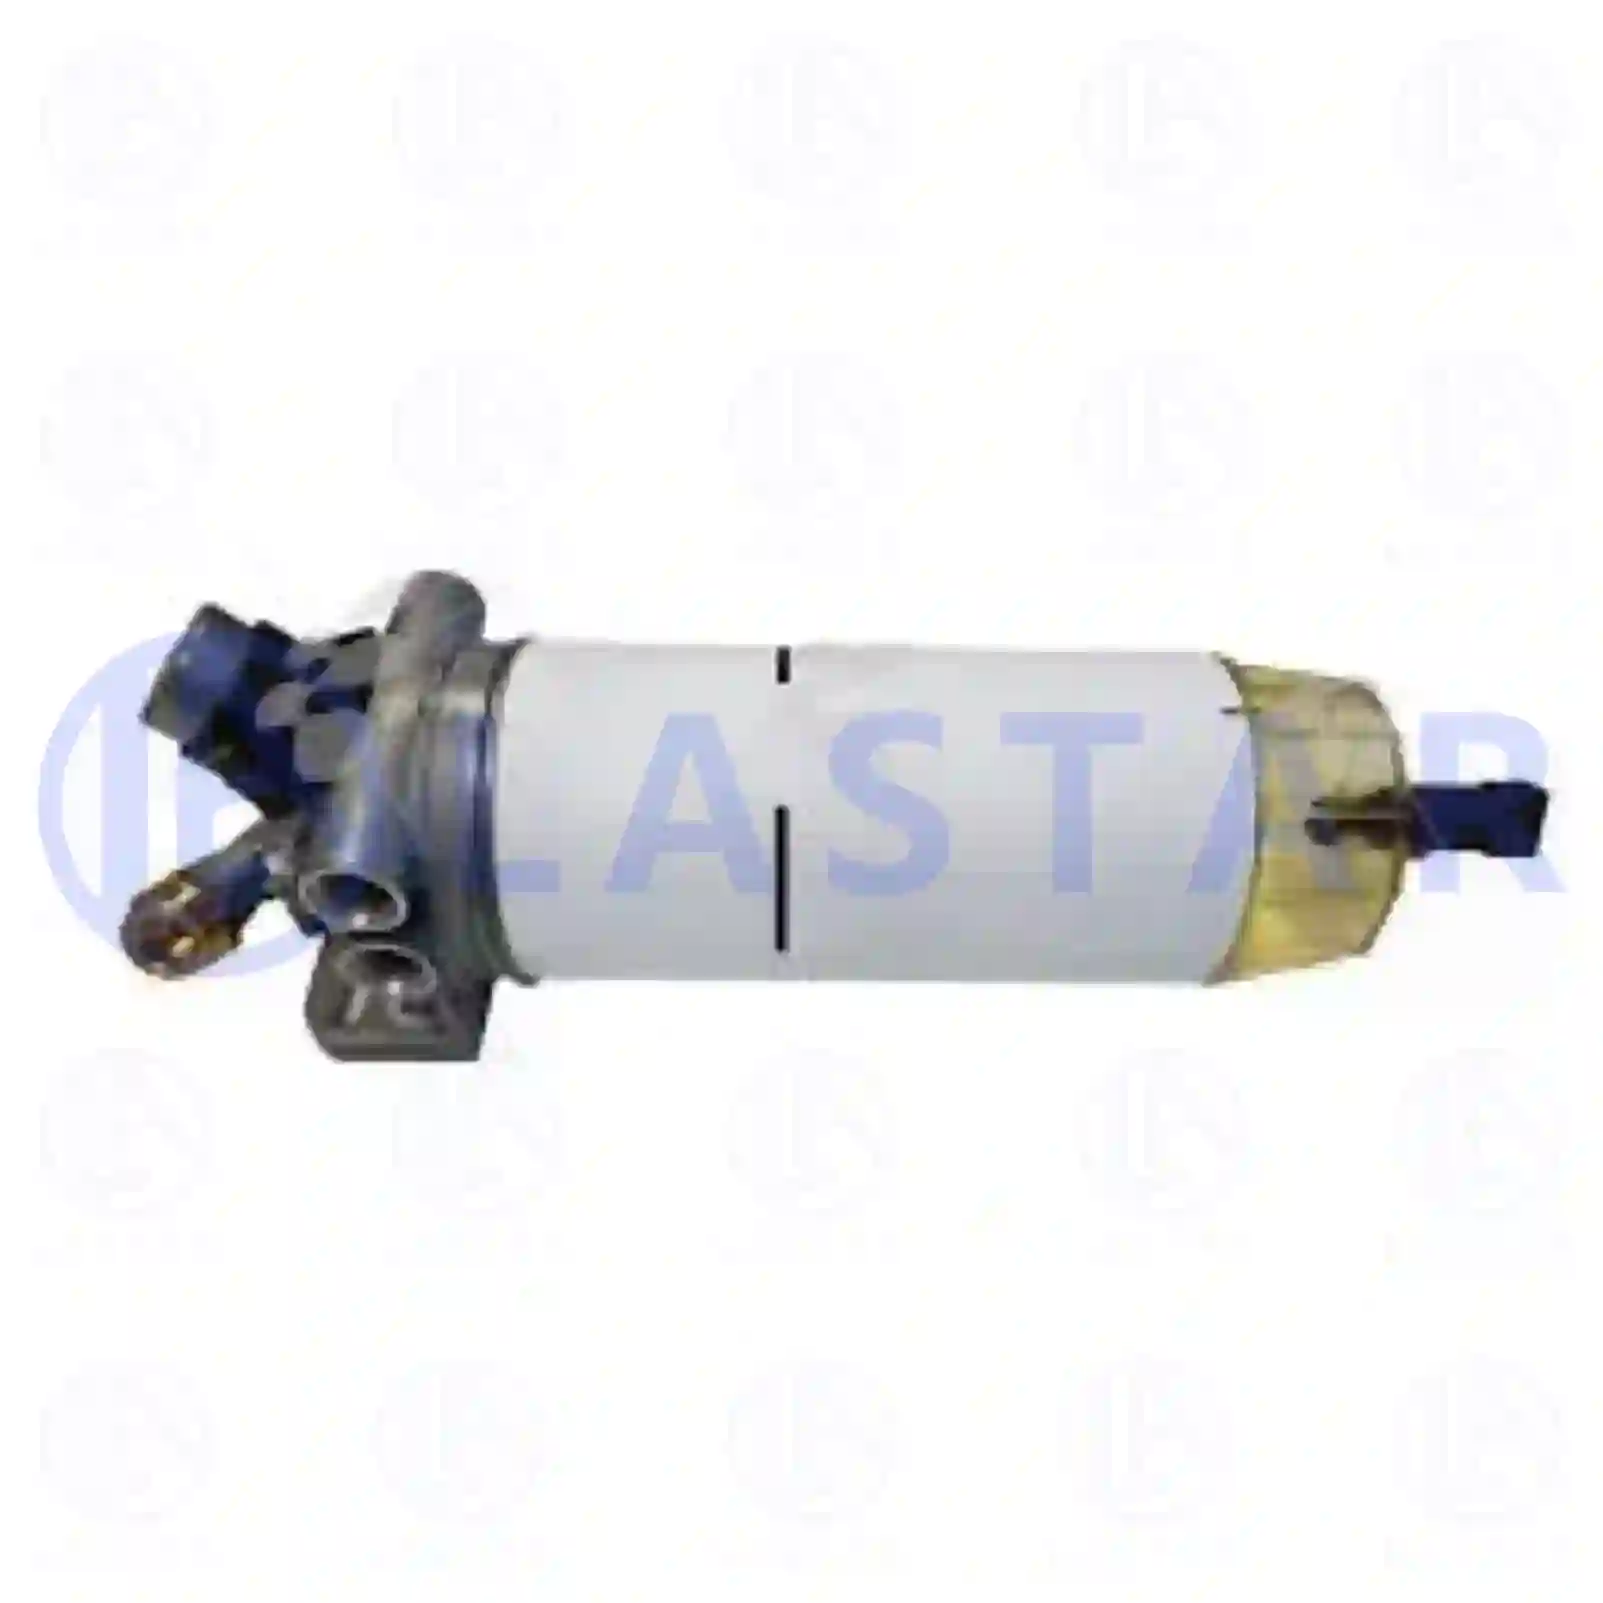 Fuel filter, complete, 77724306, 5801957910 ||  77724306 Lastar Spare Part | Truck Spare Parts, Auotomotive Spare Parts Fuel filter, complete, 77724306, 5801957910 ||  77724306 Lastar Spare Part | Truck Spare Parts, Auotomotive Spare Parts